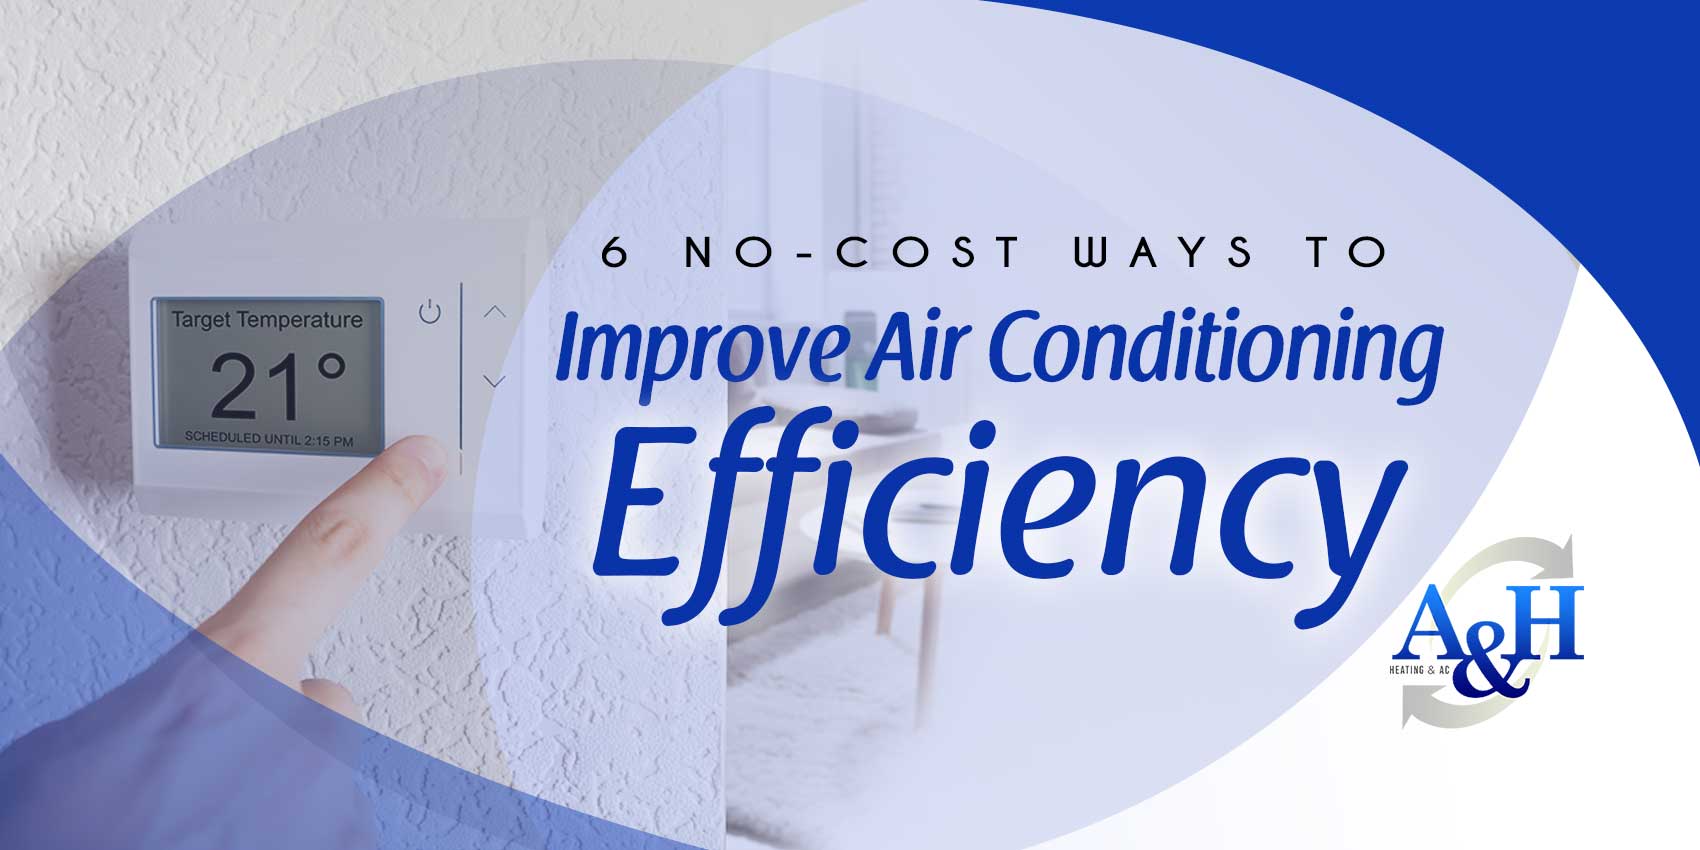 6 No-Cost Ways to Improve Air Conditioning Efficiency